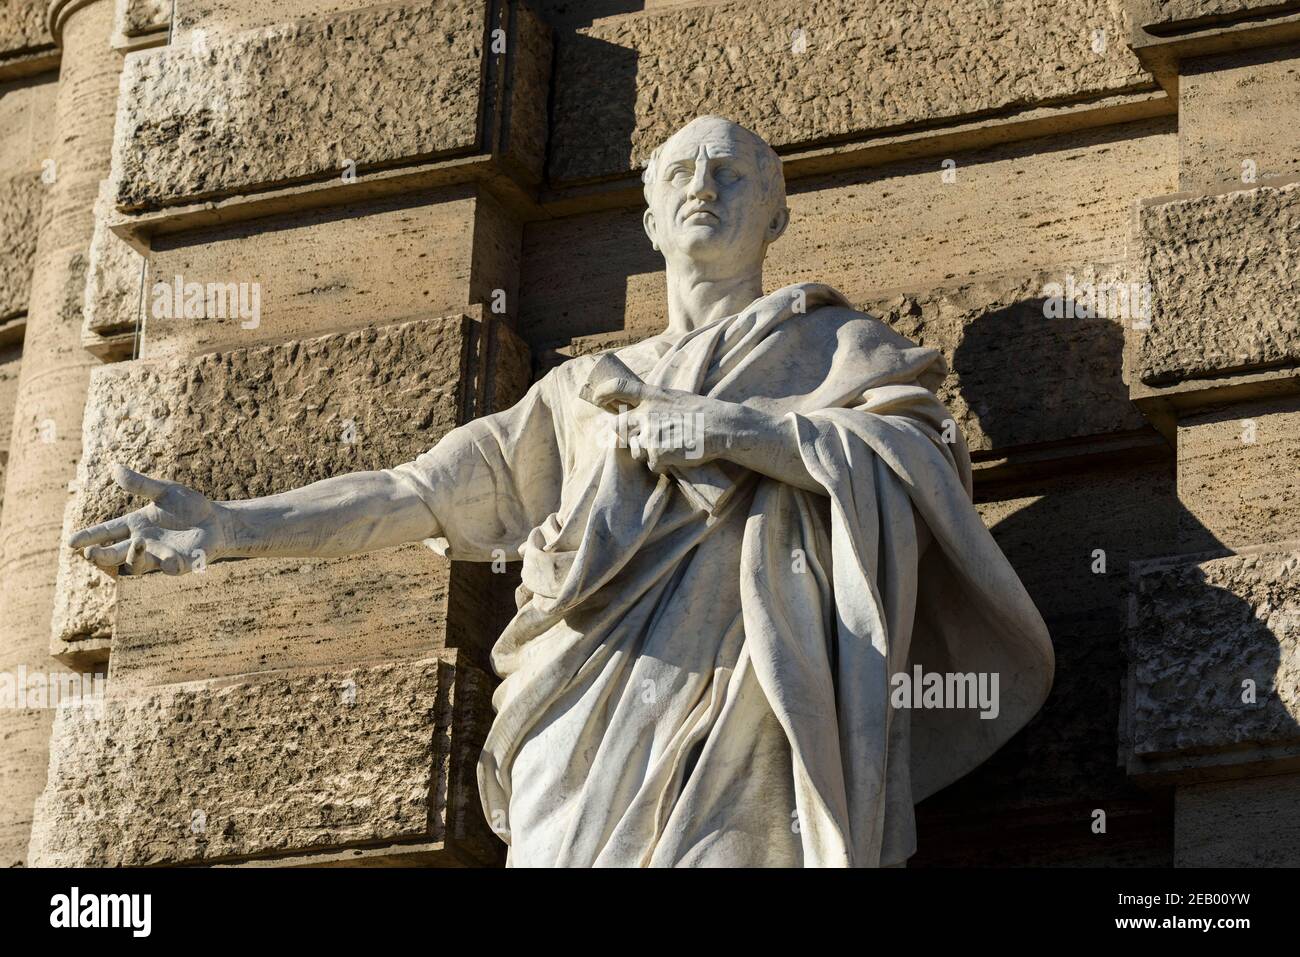 Statue of the Roman orator Cicero outside of the Palace of Justice in Rome, Italy. Stock Photo